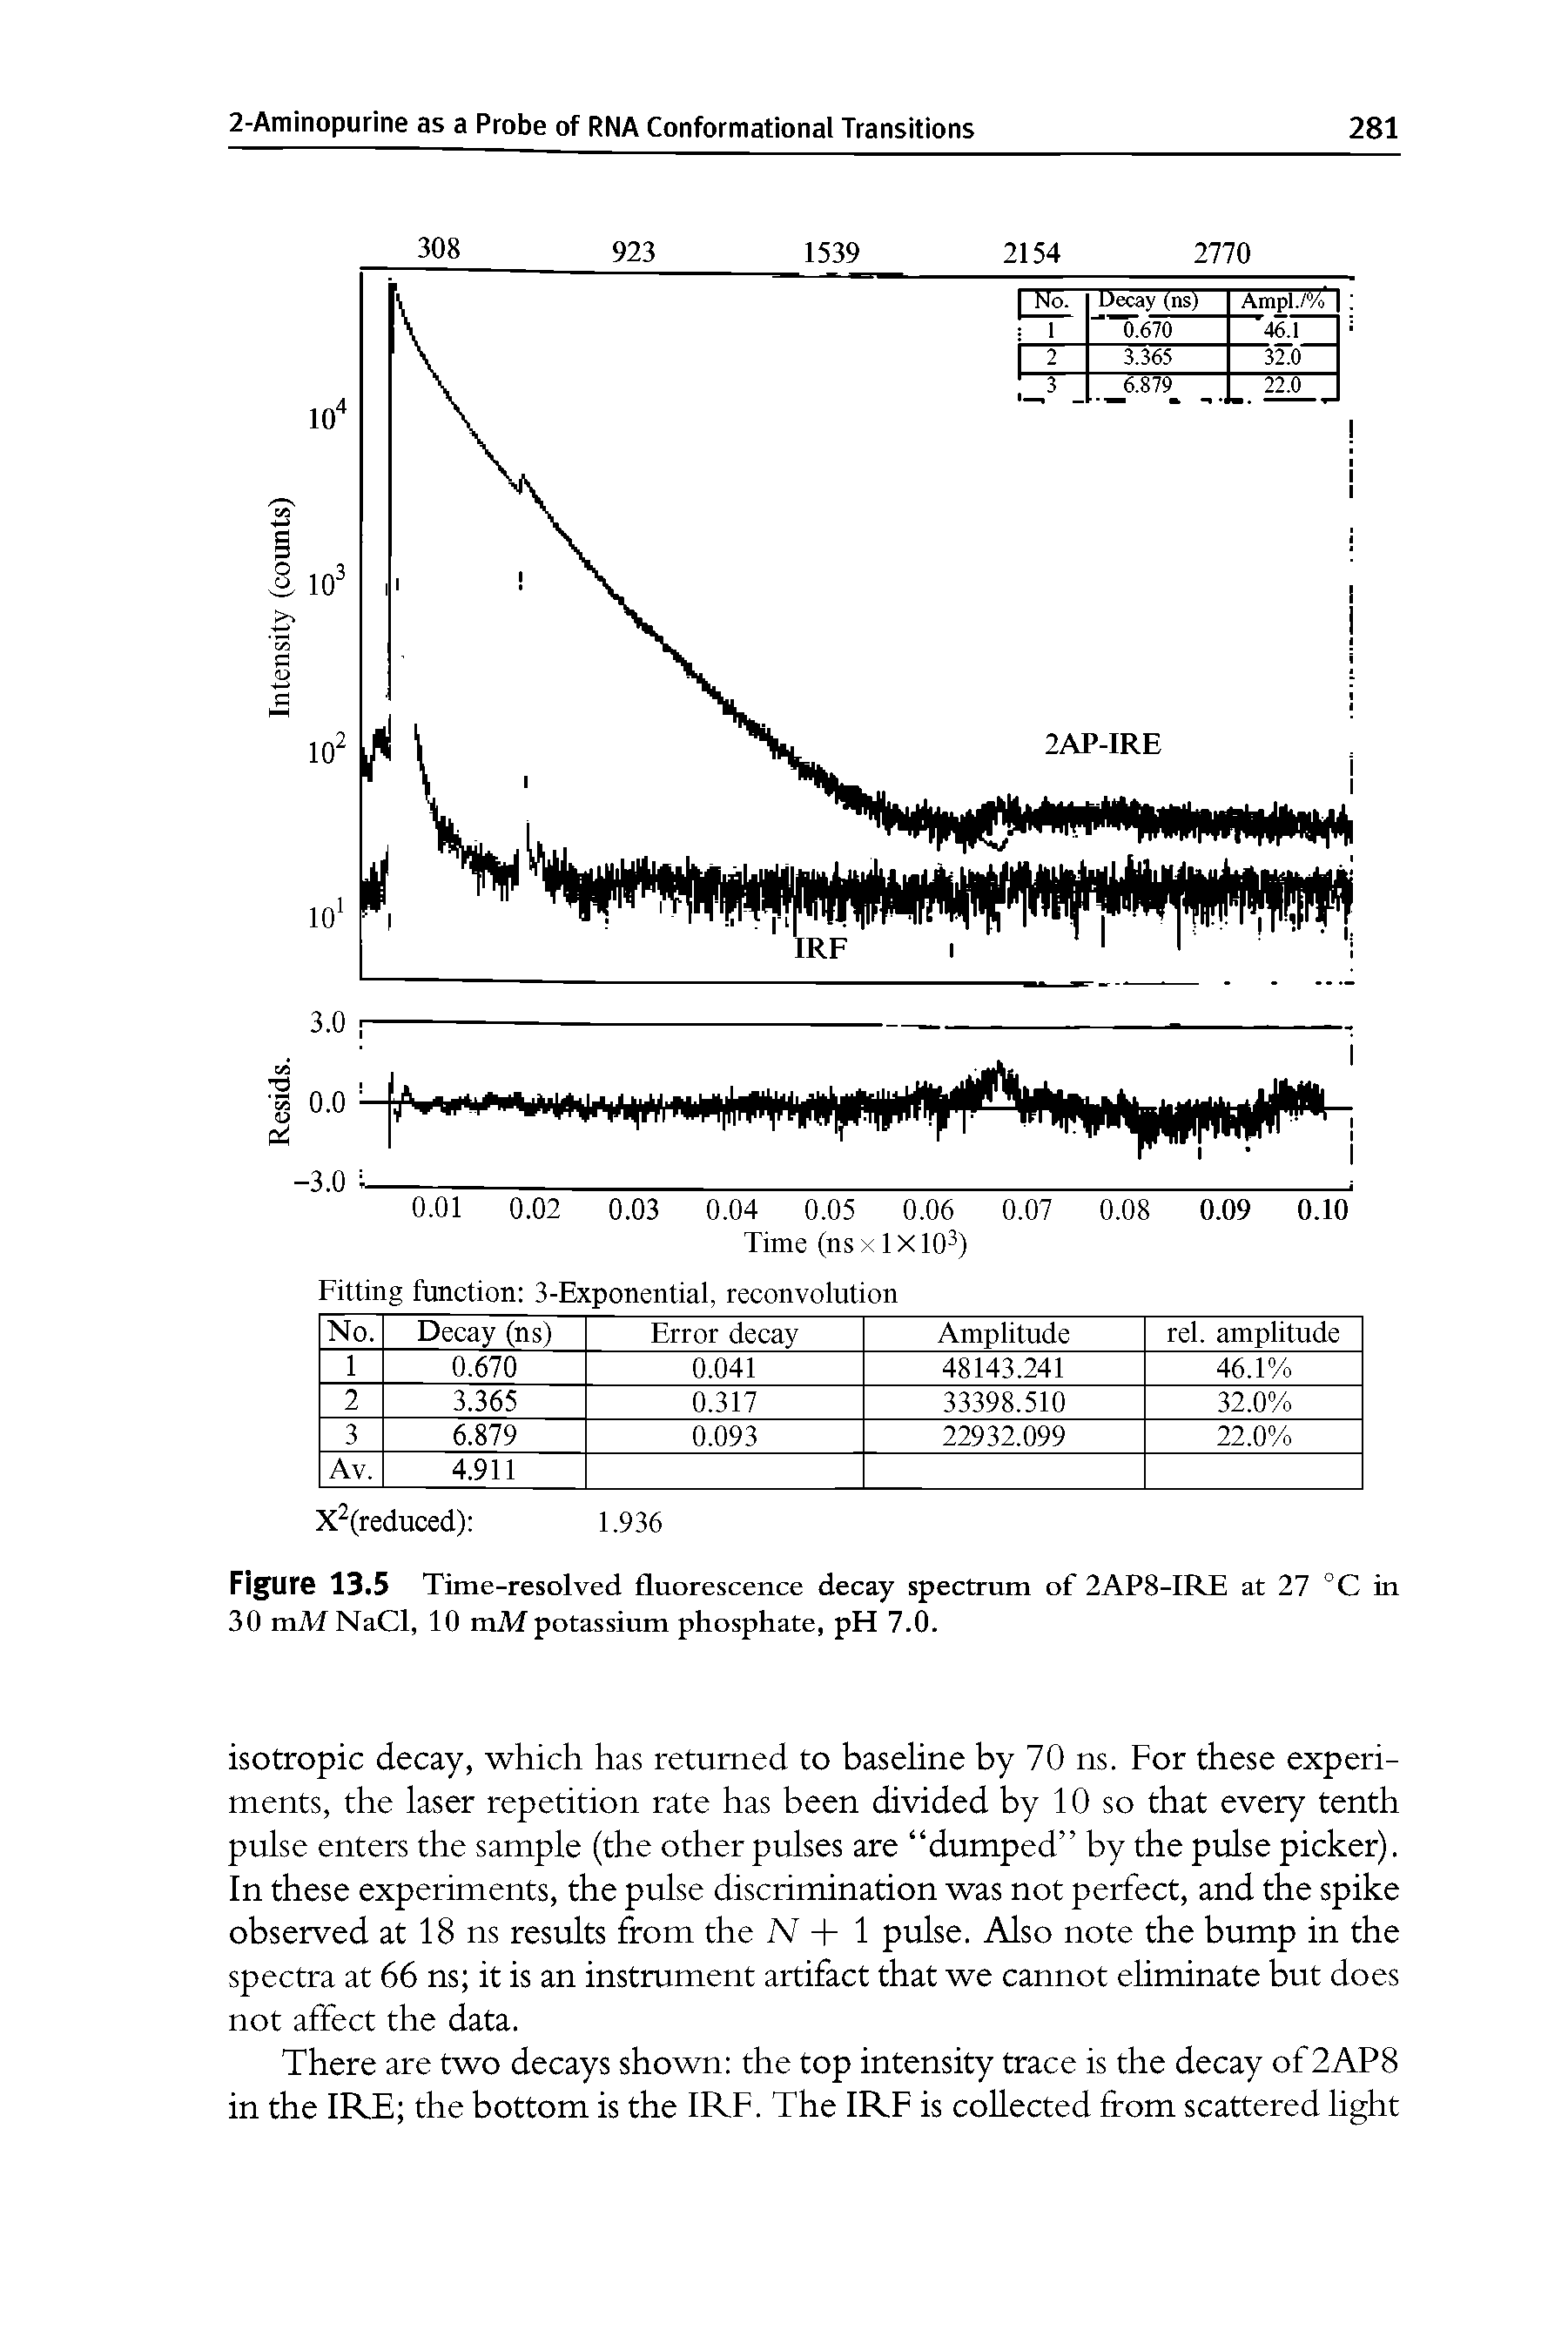 Figure 13.5 Time-resolved fluorescence decay spectrum of 2AP8-IRE at 27 °C in 30 mM NaCl, 10 mM potassium phosphate, pH 7.0.